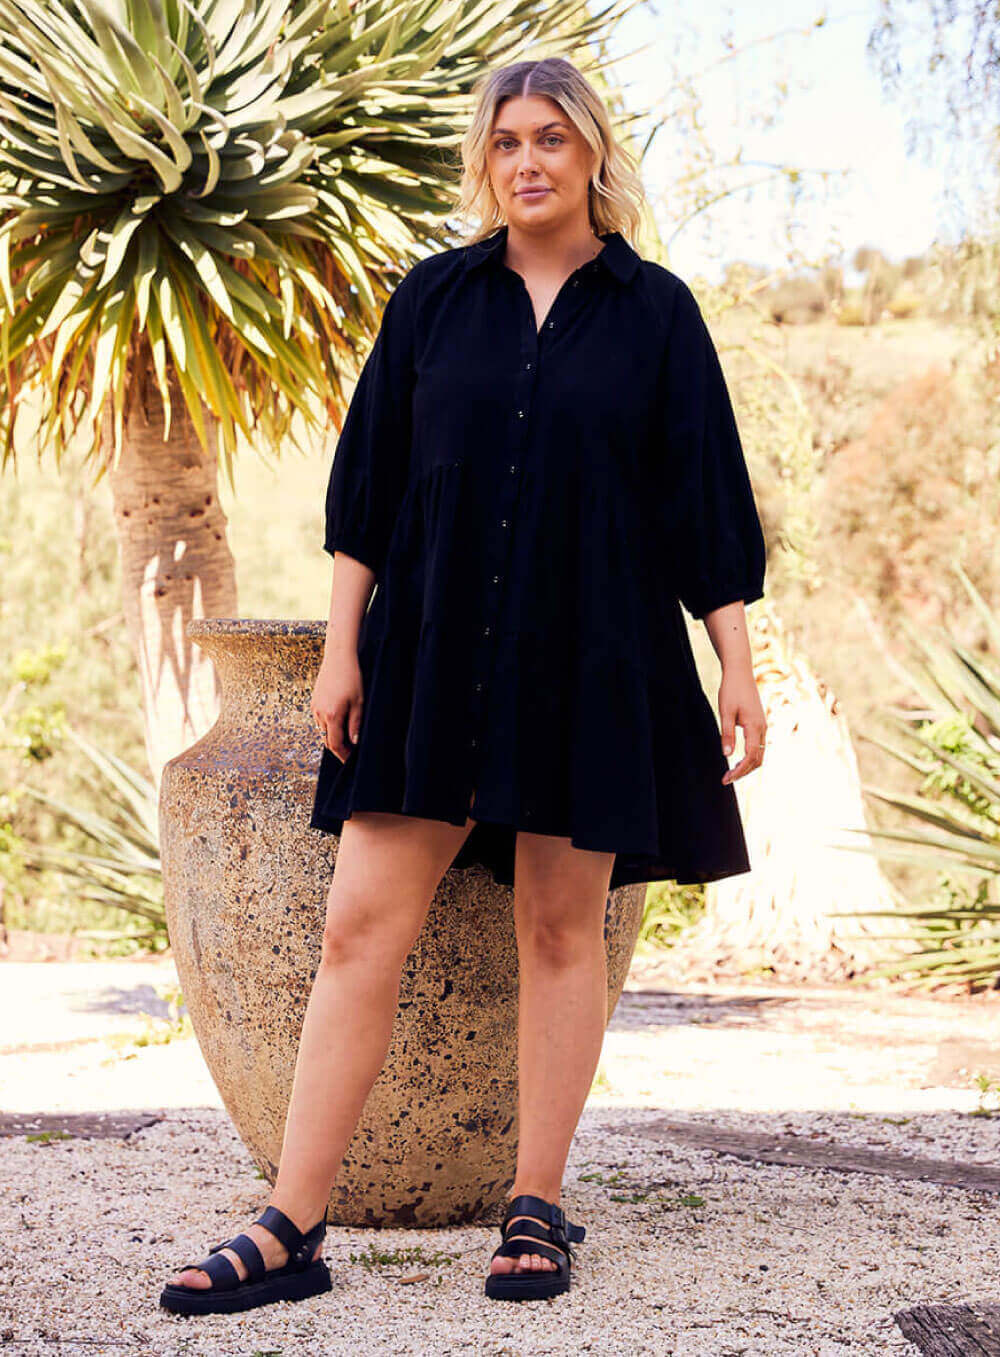 The Jasmine Dress in black is made of 100% soft cotton, featuring a collar neck, 3/4 sleeve with elastic cuff button through front all the way to the hem, tiered layers through the body, midi in length and 2 side pockets